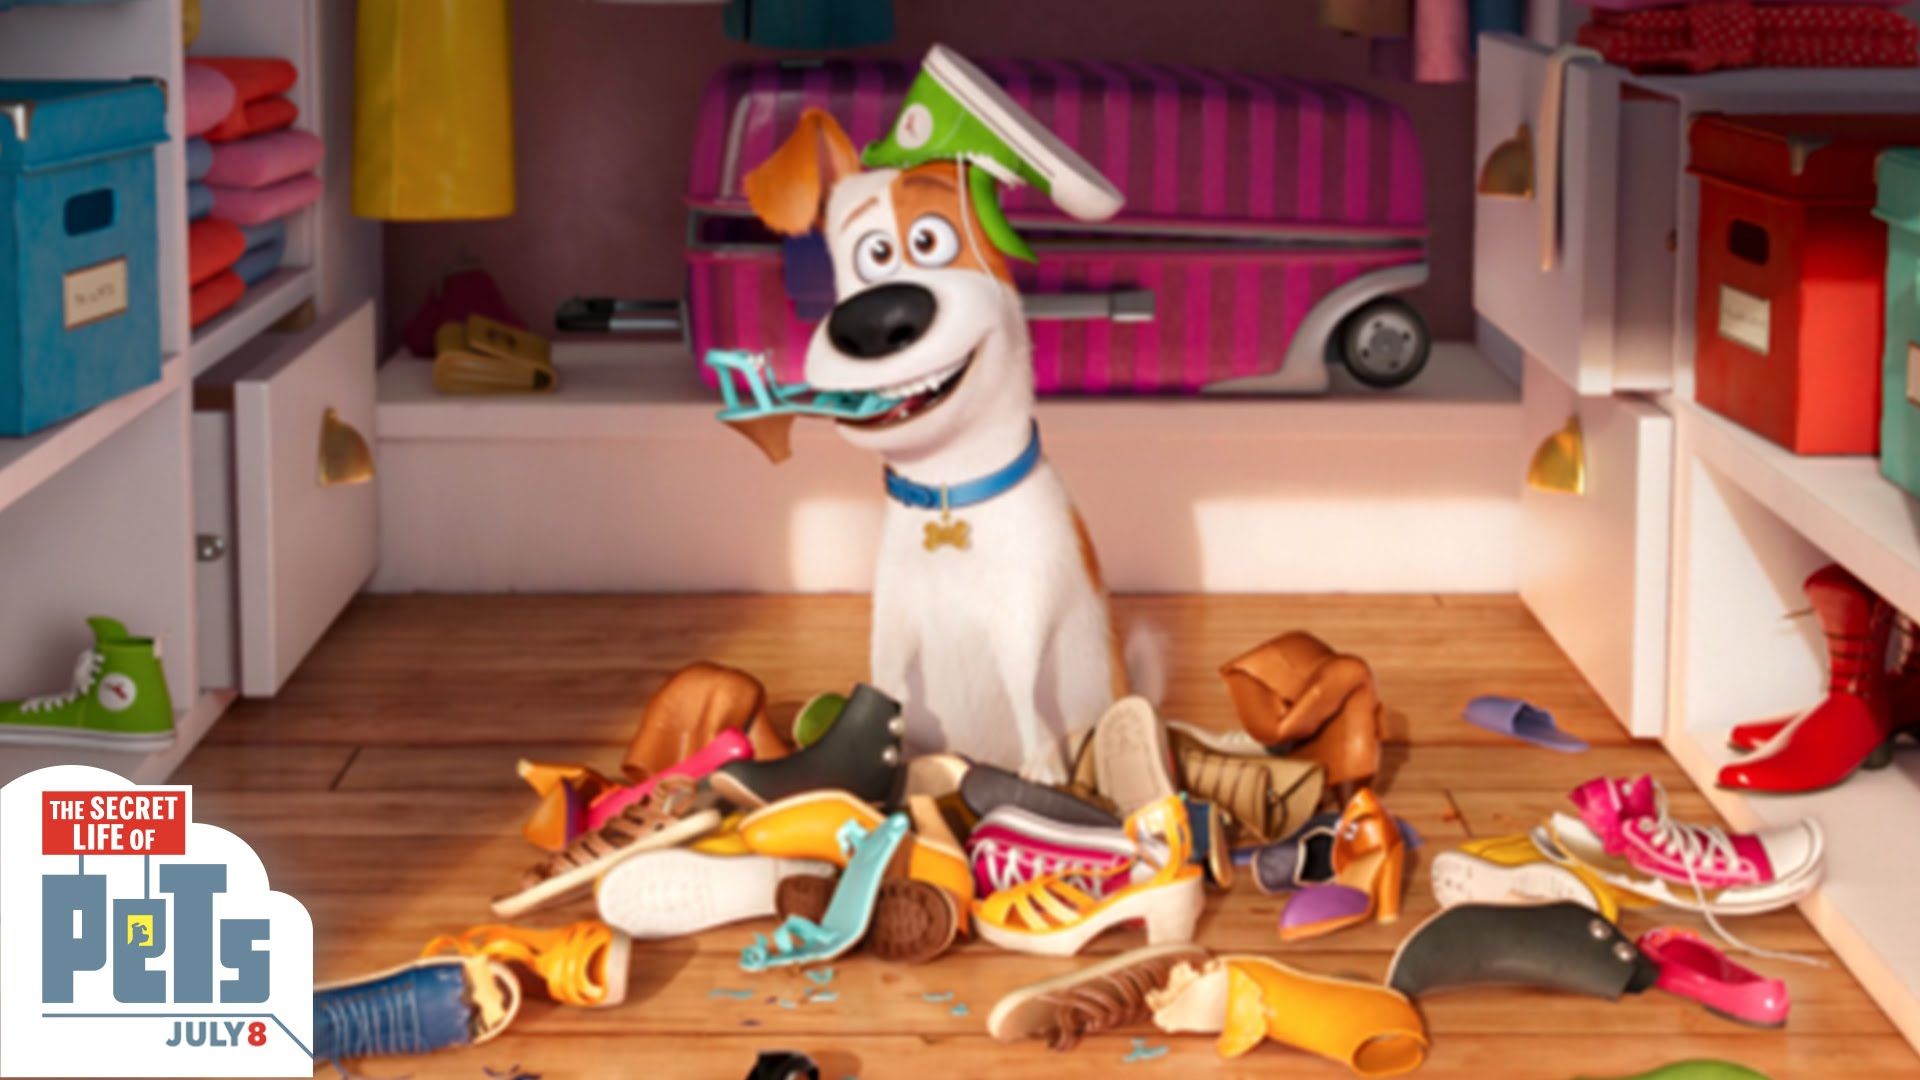 The Secret Life Of Pets wallpaper, Movie, HQ The Secret Life Of Pets pictureK Wallpaper 2019